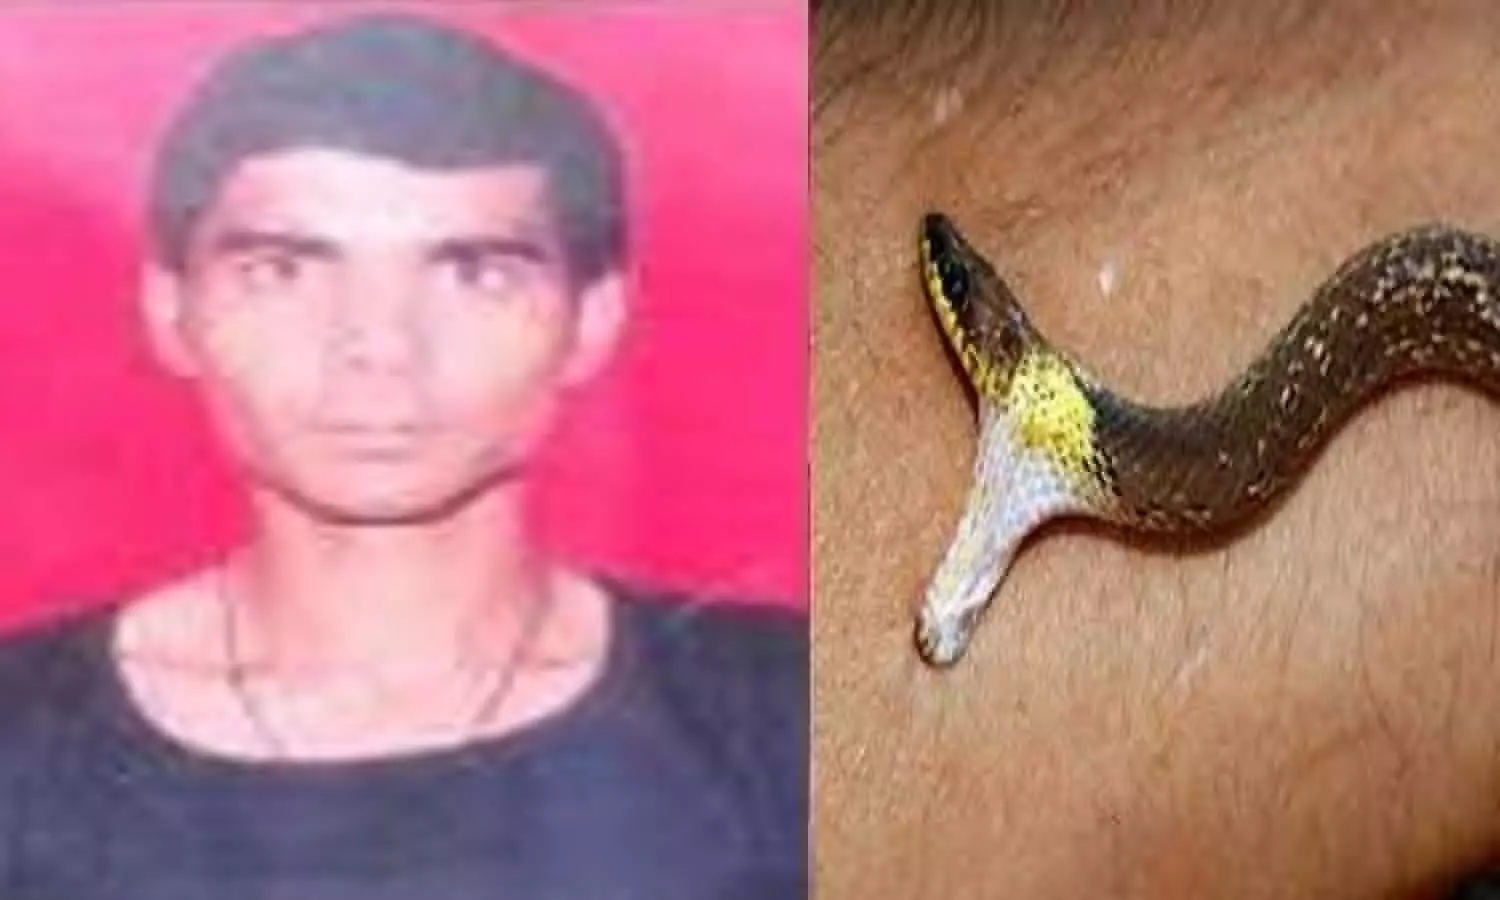 Poisonous snake bites the couple - husband dies, pregnant wife serious